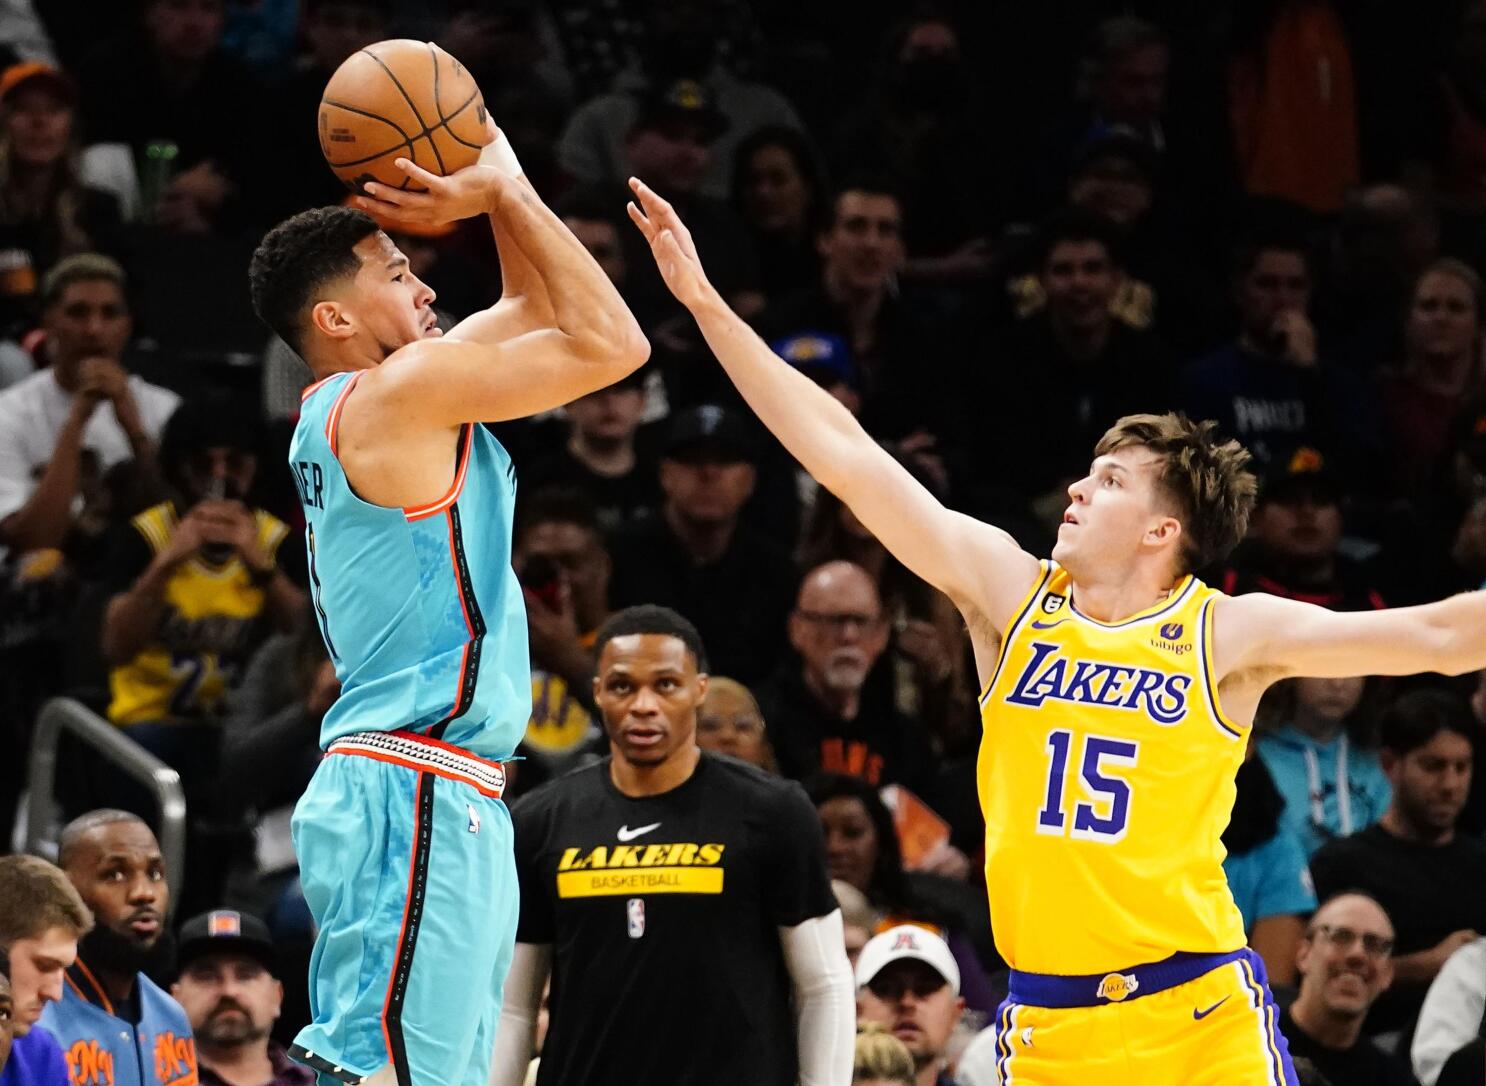 Devin Booker and Deandre Ayton push Suns to an easy win over Lakers / News  